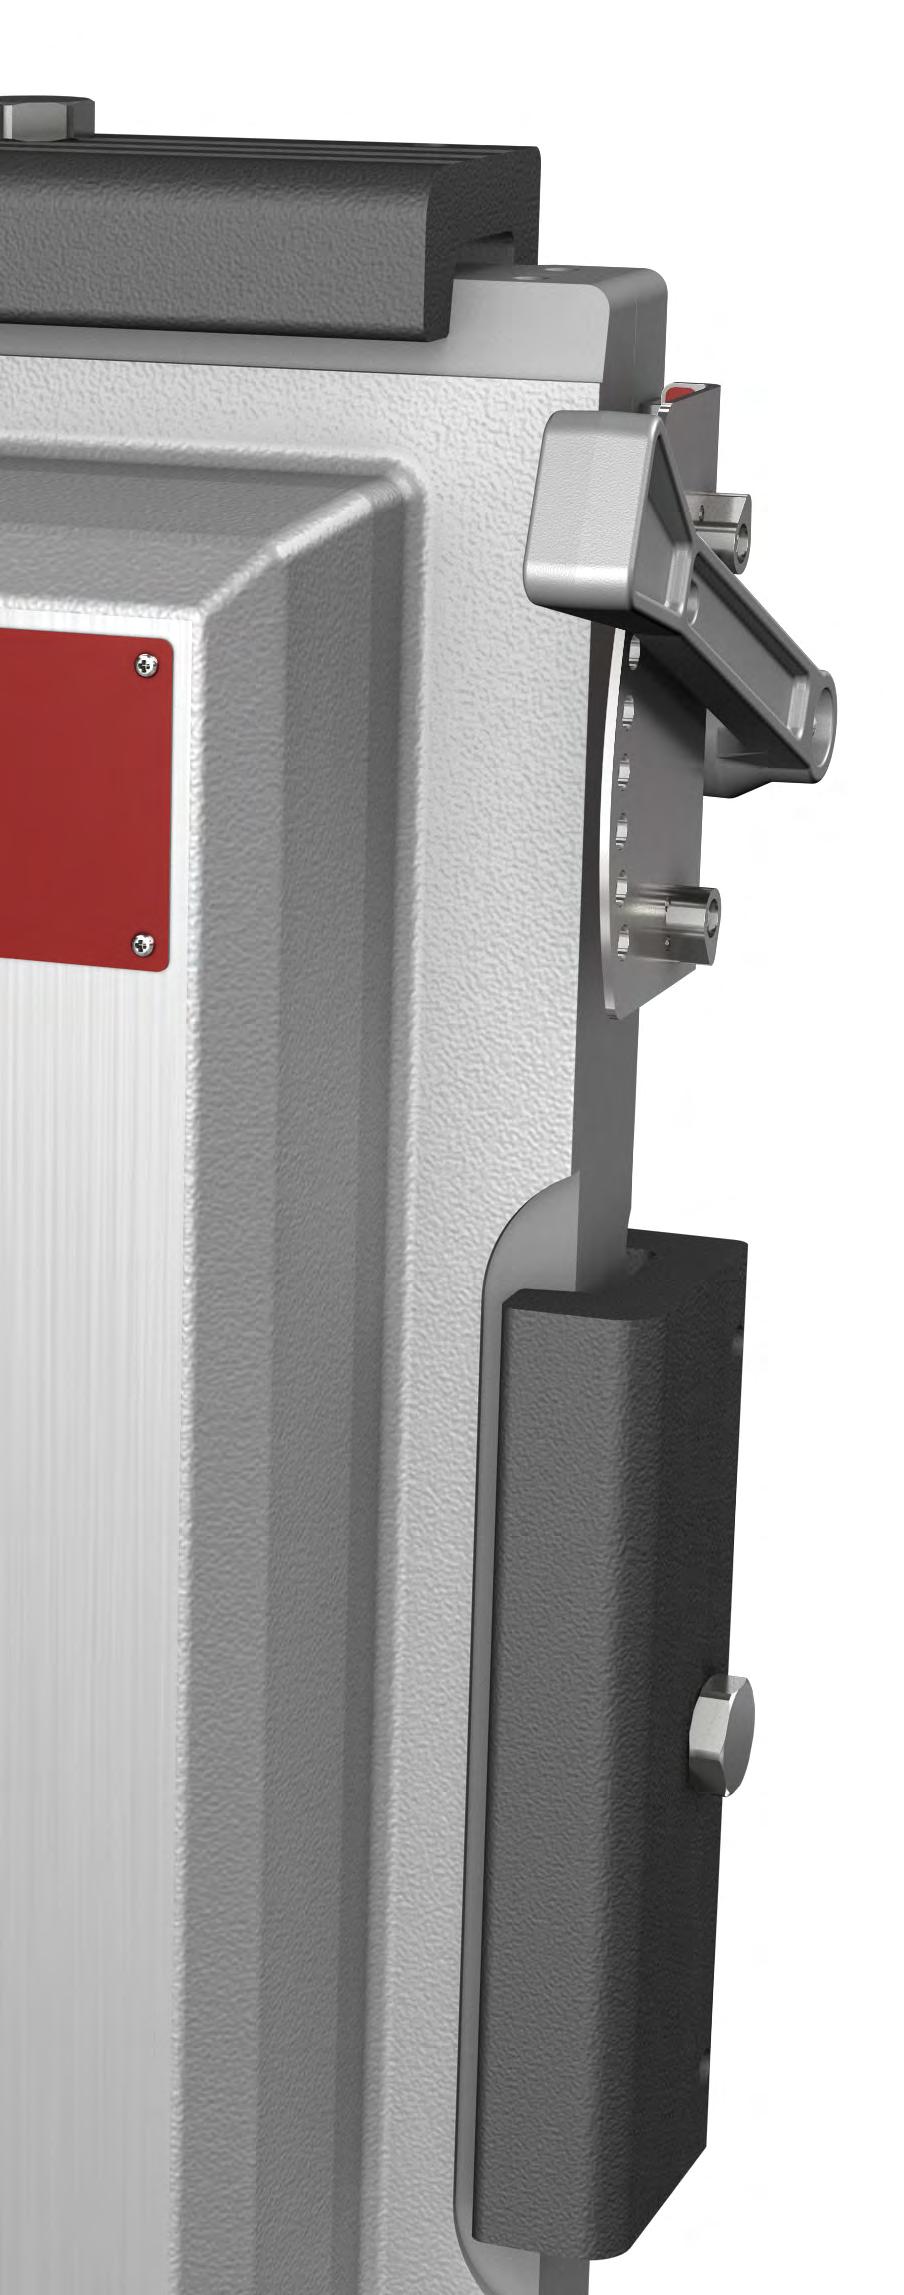 Clamped : NEMA 7 classified enclosures Safer. Faster. Easy access, lower risk and less downtime. Creative thinking and reliable solutions.